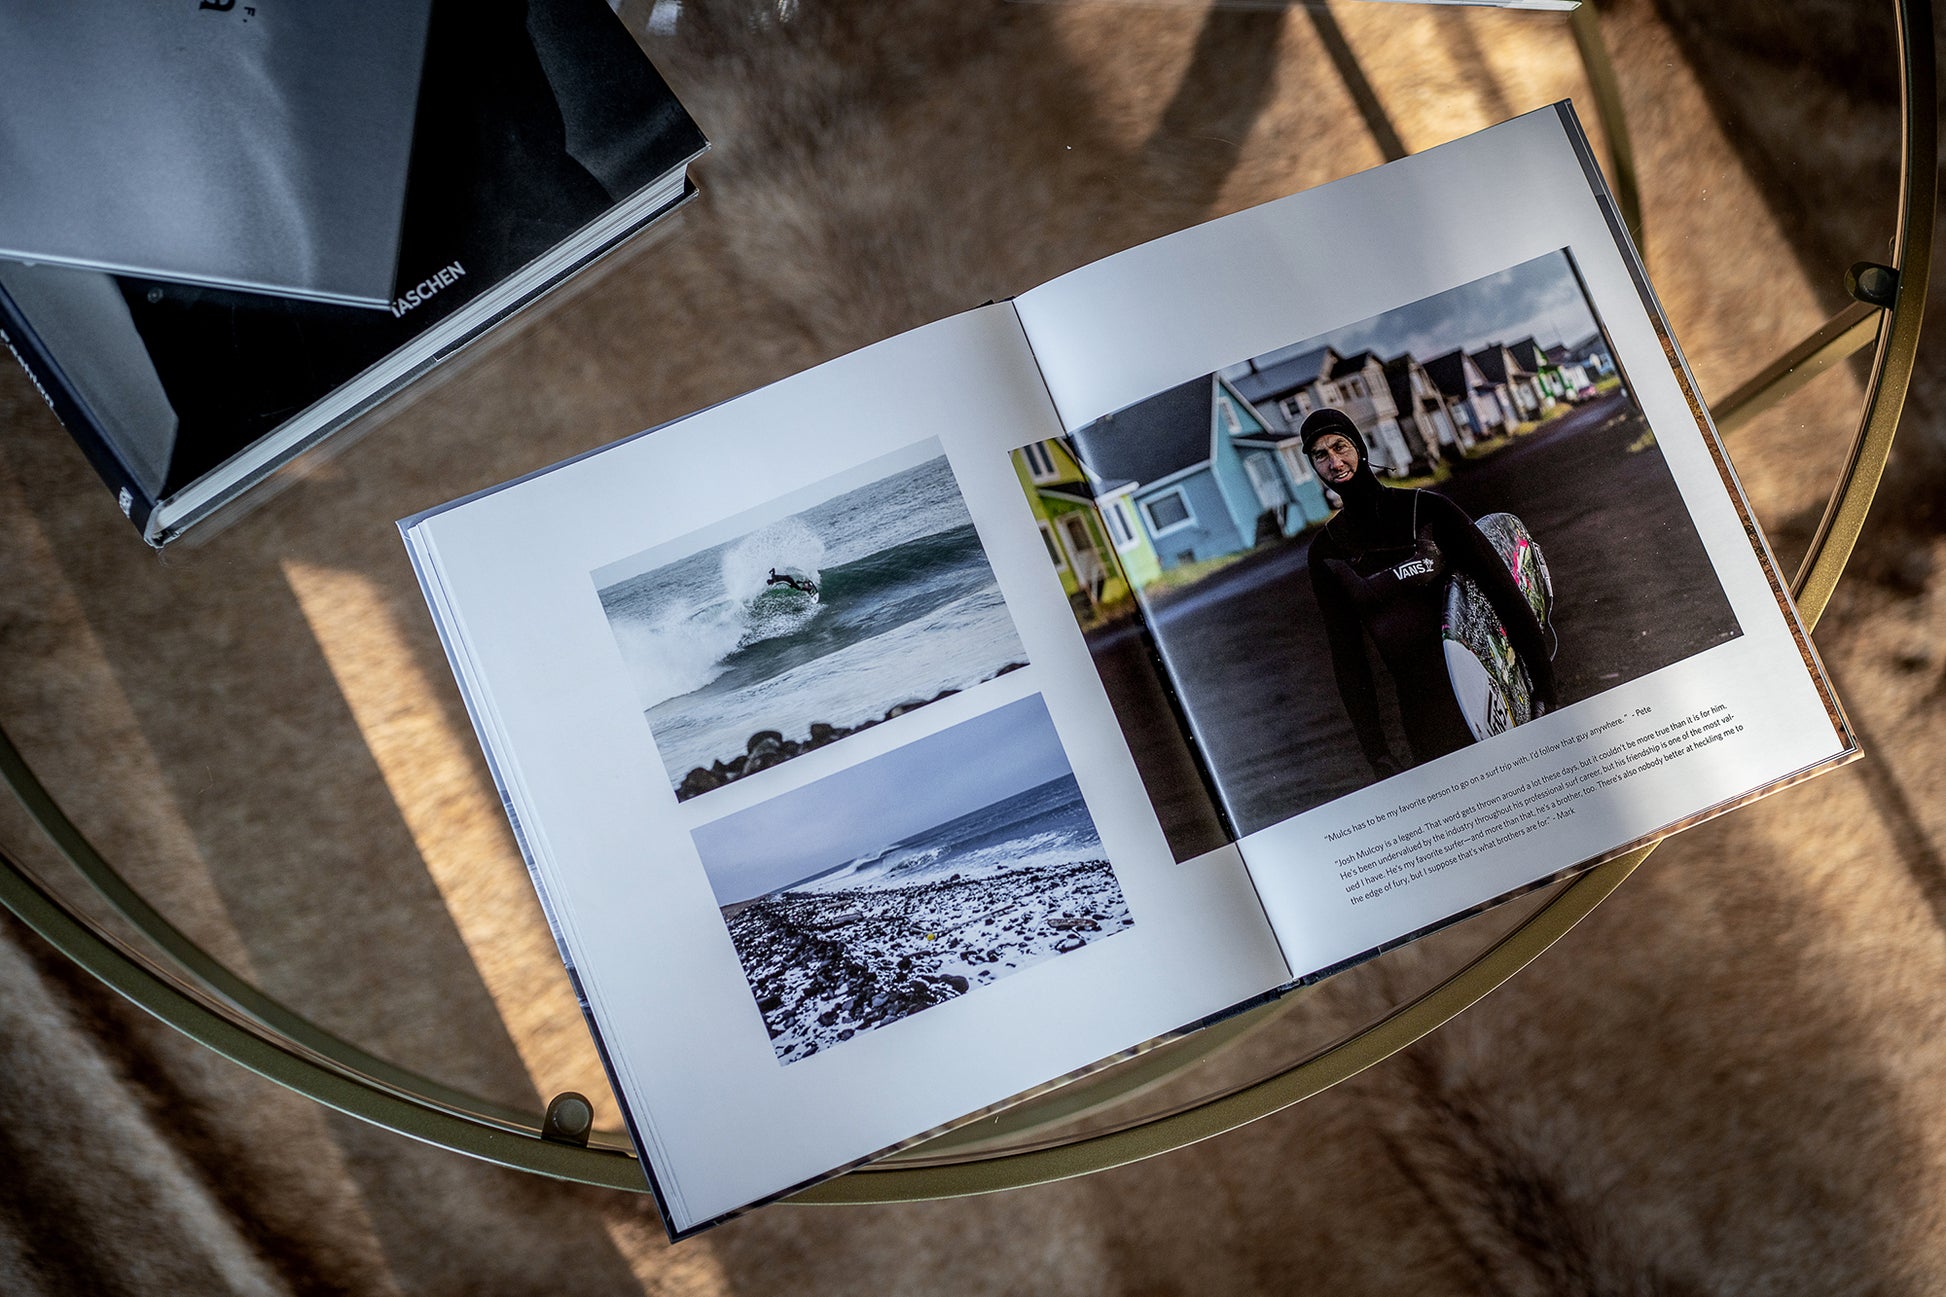 Island X- A photography book by Mark McInnis- Standard edition open on a coffee table.